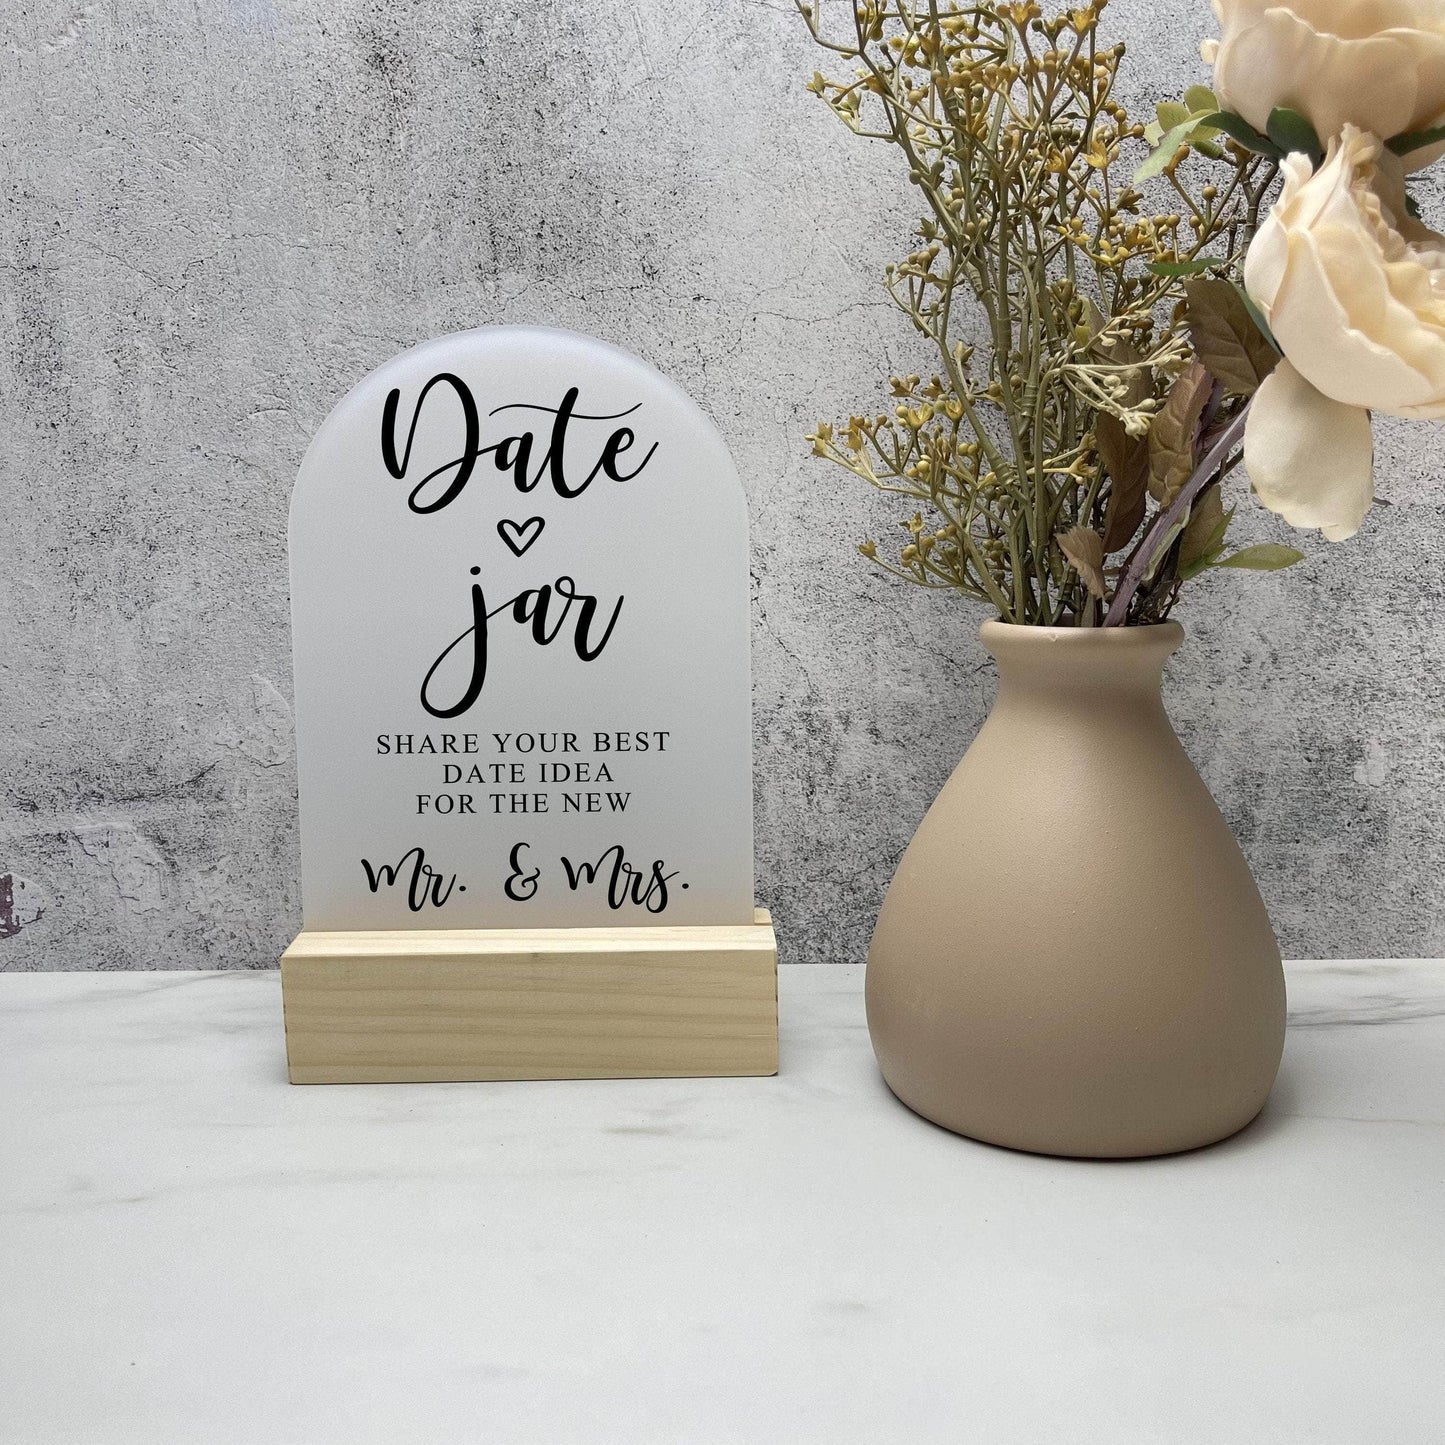 Date jar acrylic sign, Wedding Sign, Event Sign, Party Decor